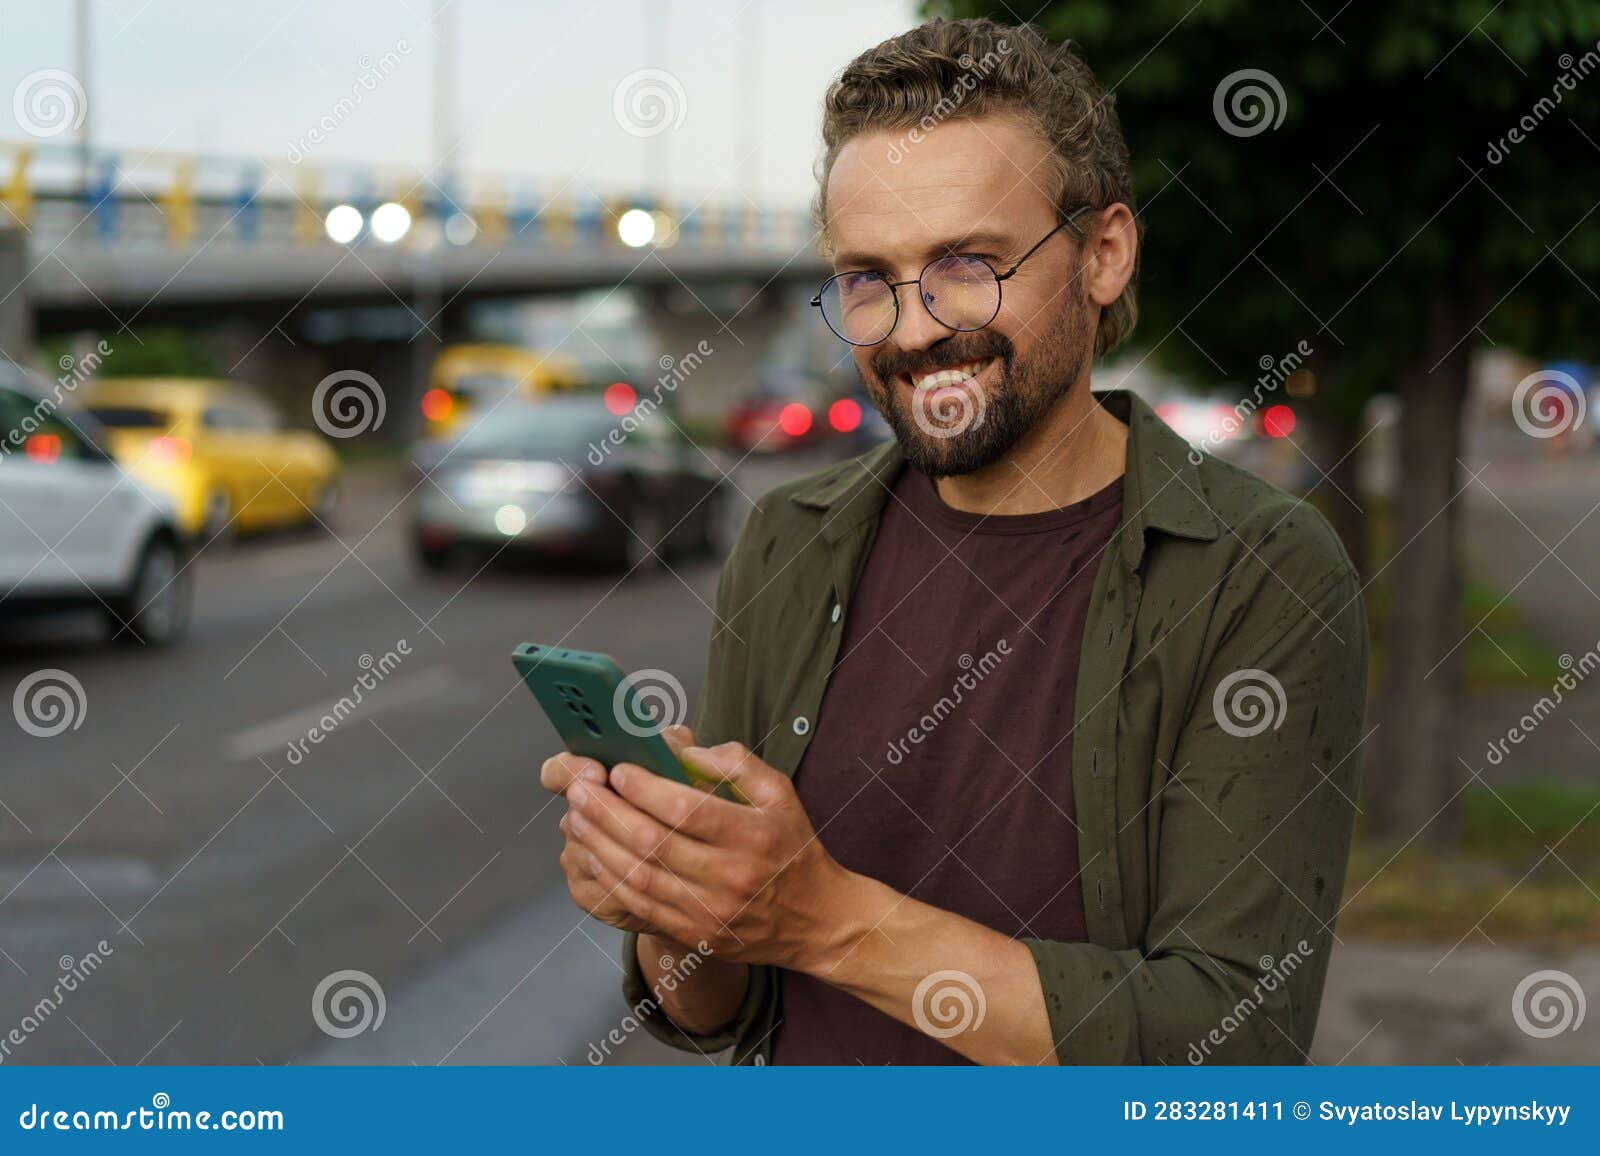 happy customer making order for taxi cab. with smile on face, man uses phone to book ride while dusk sets in and street